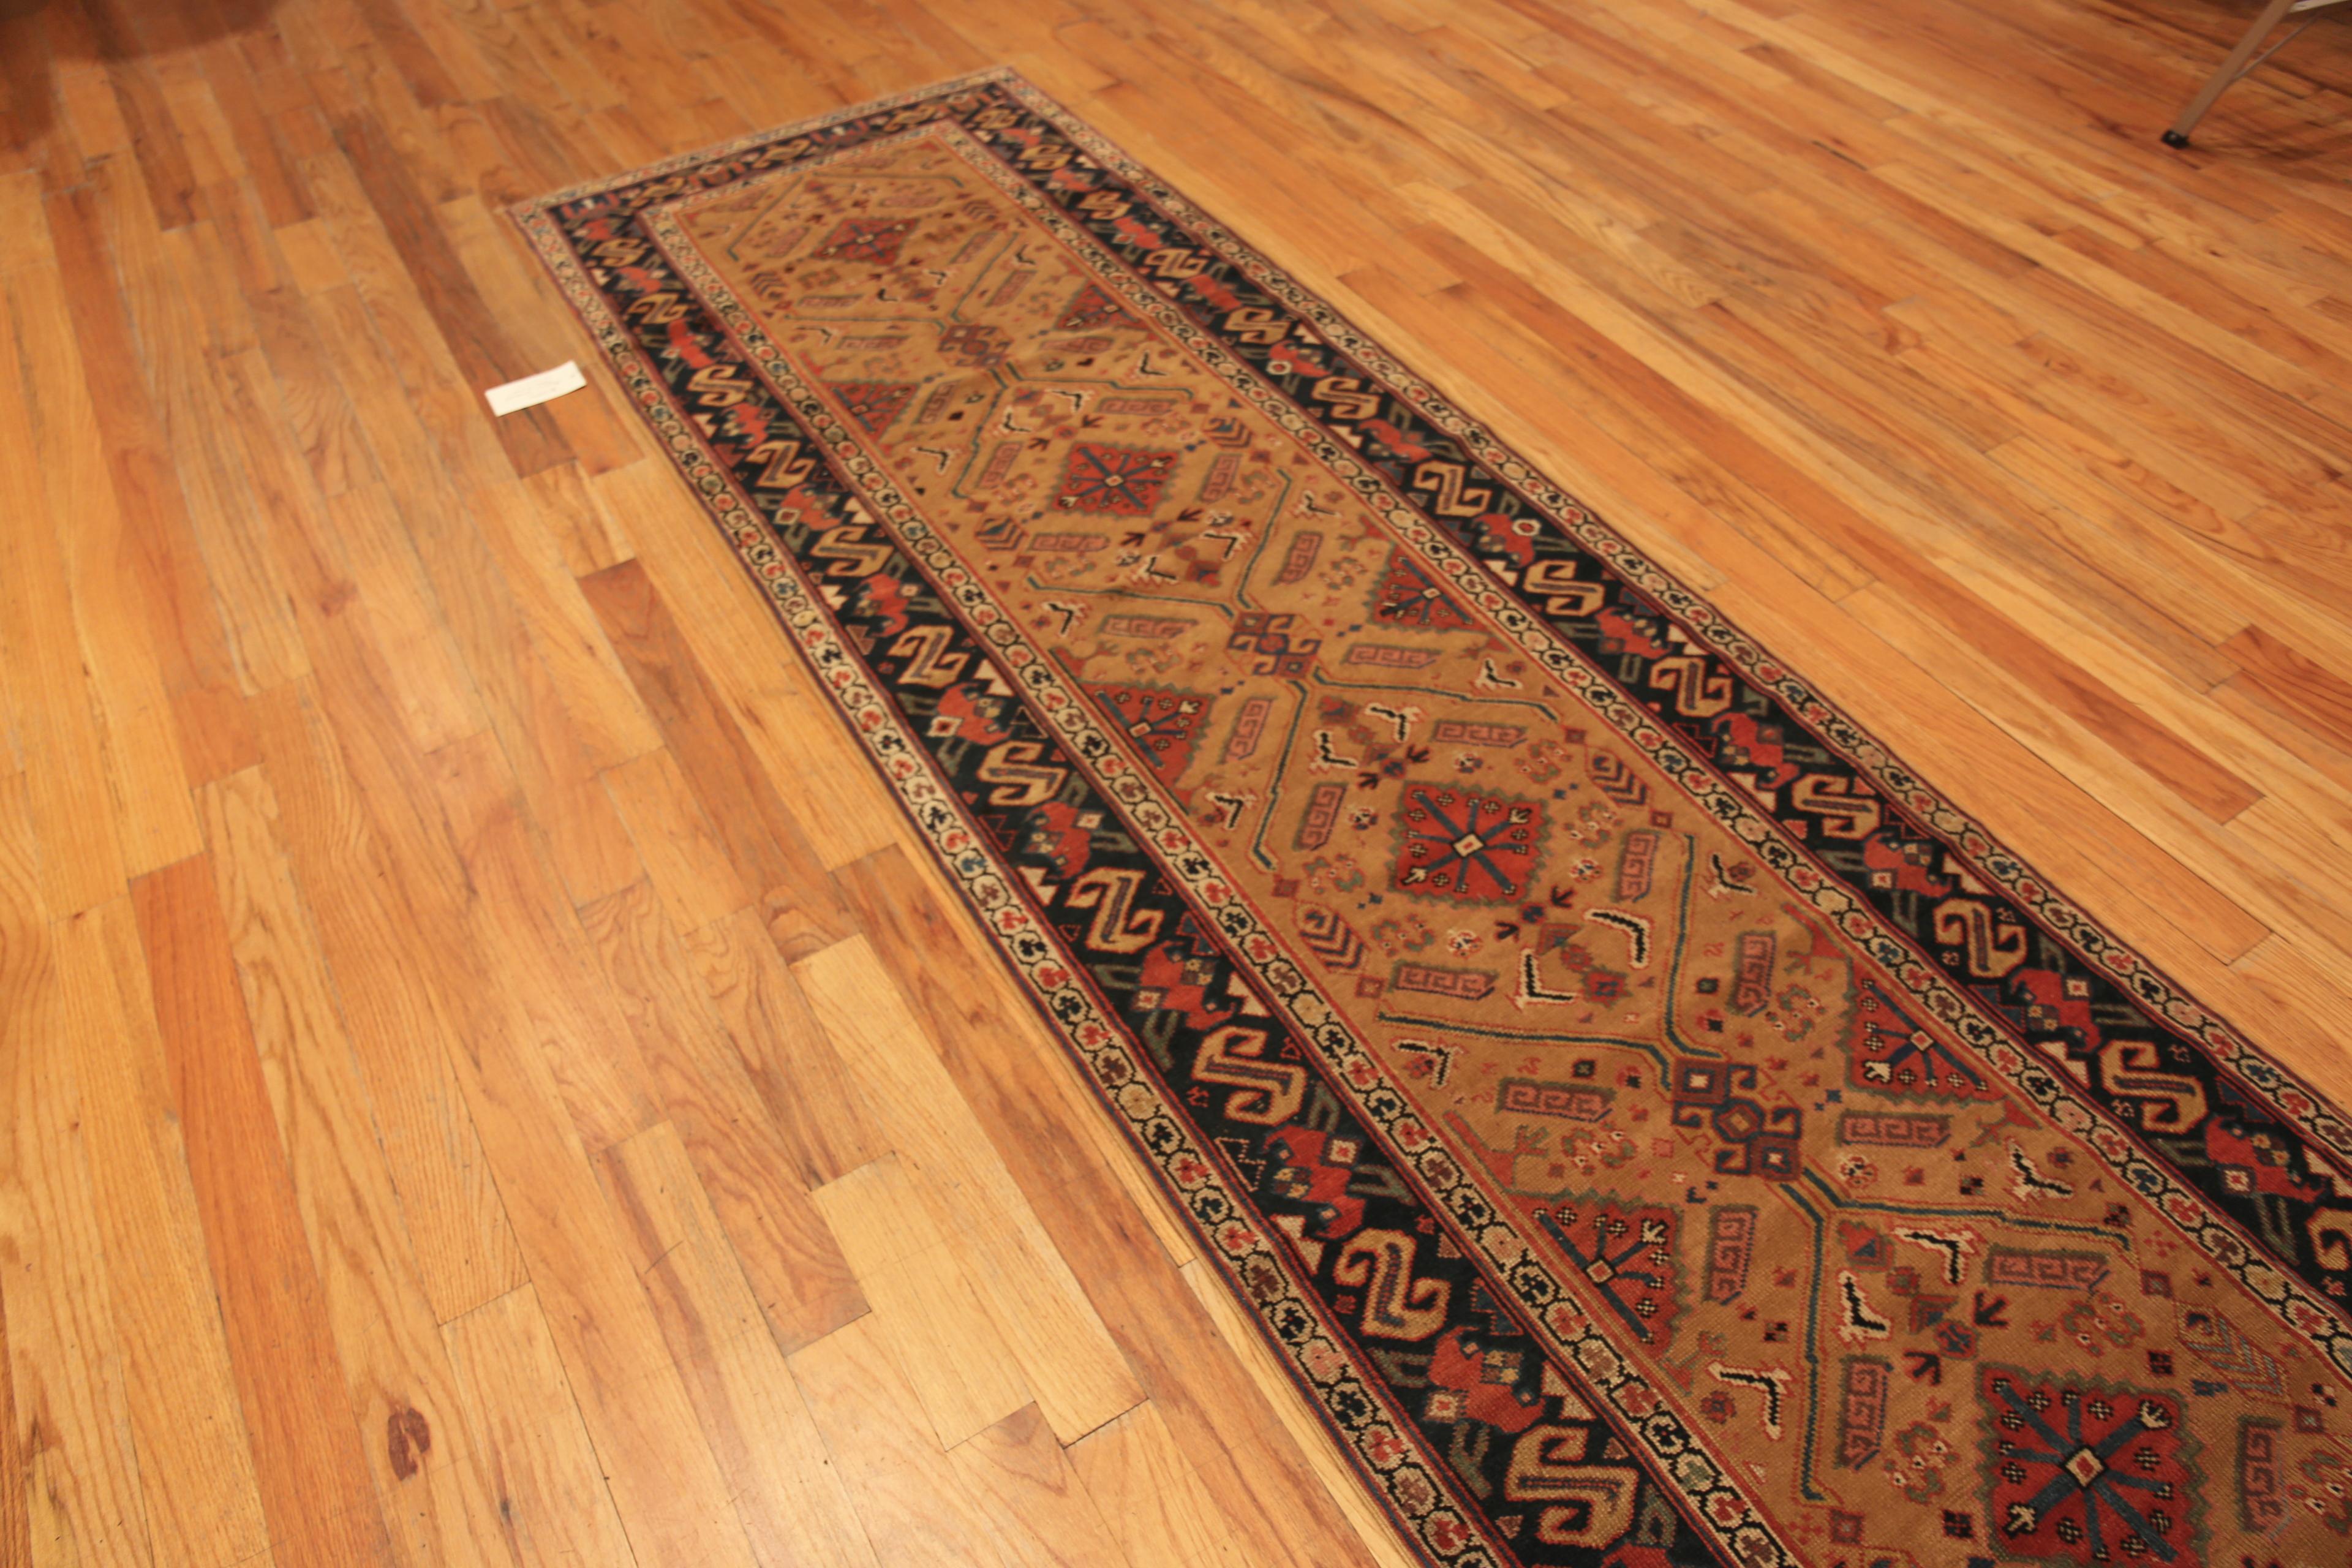 Antique Northwest Persian Runner, Country of Origin: Persian Rug, Circa Date: 1900. Size: 3 ft 4 in x 13 ft 2 in (1.02 m x 4.01 m)

